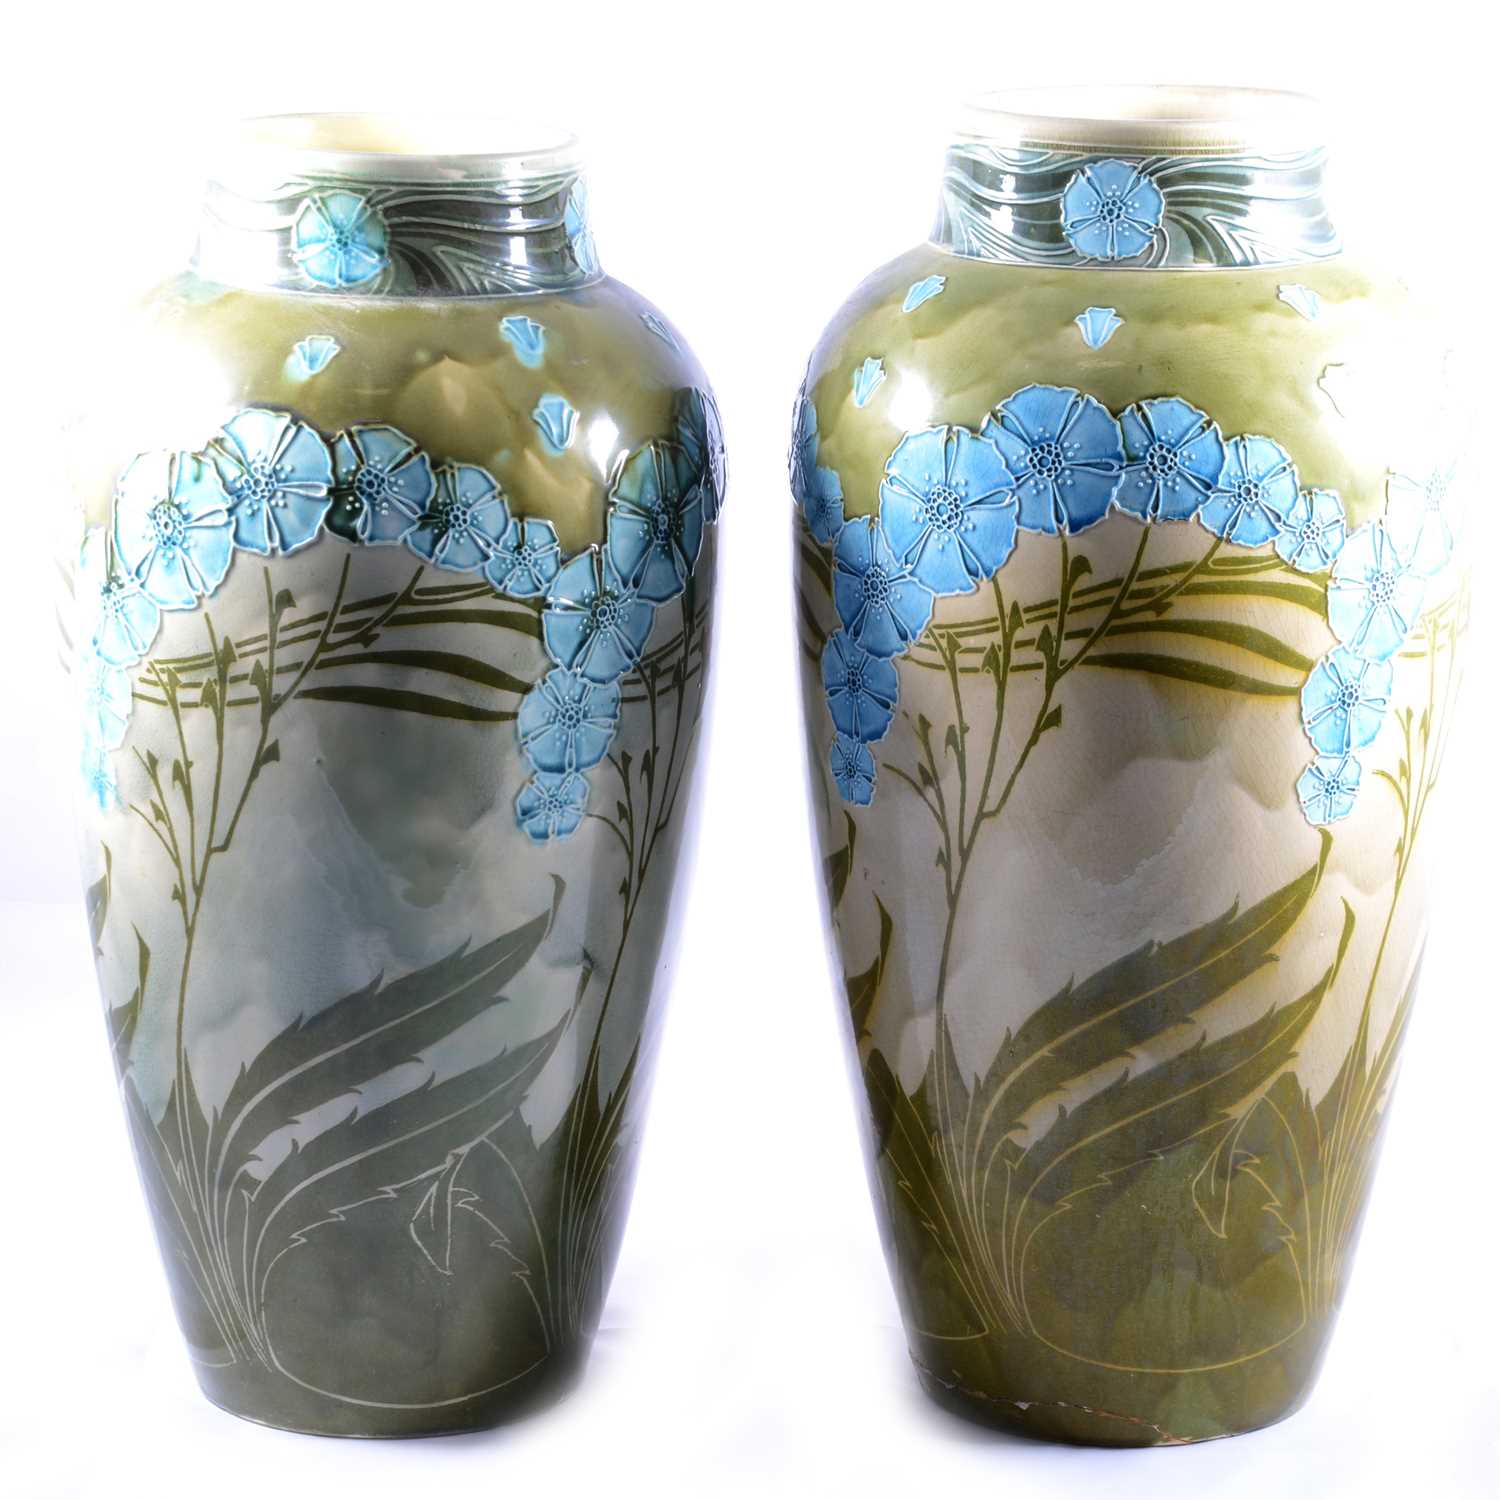 Pair of large Minton Secessionist pottery vases designed by Leon Solon and John Wadsworth